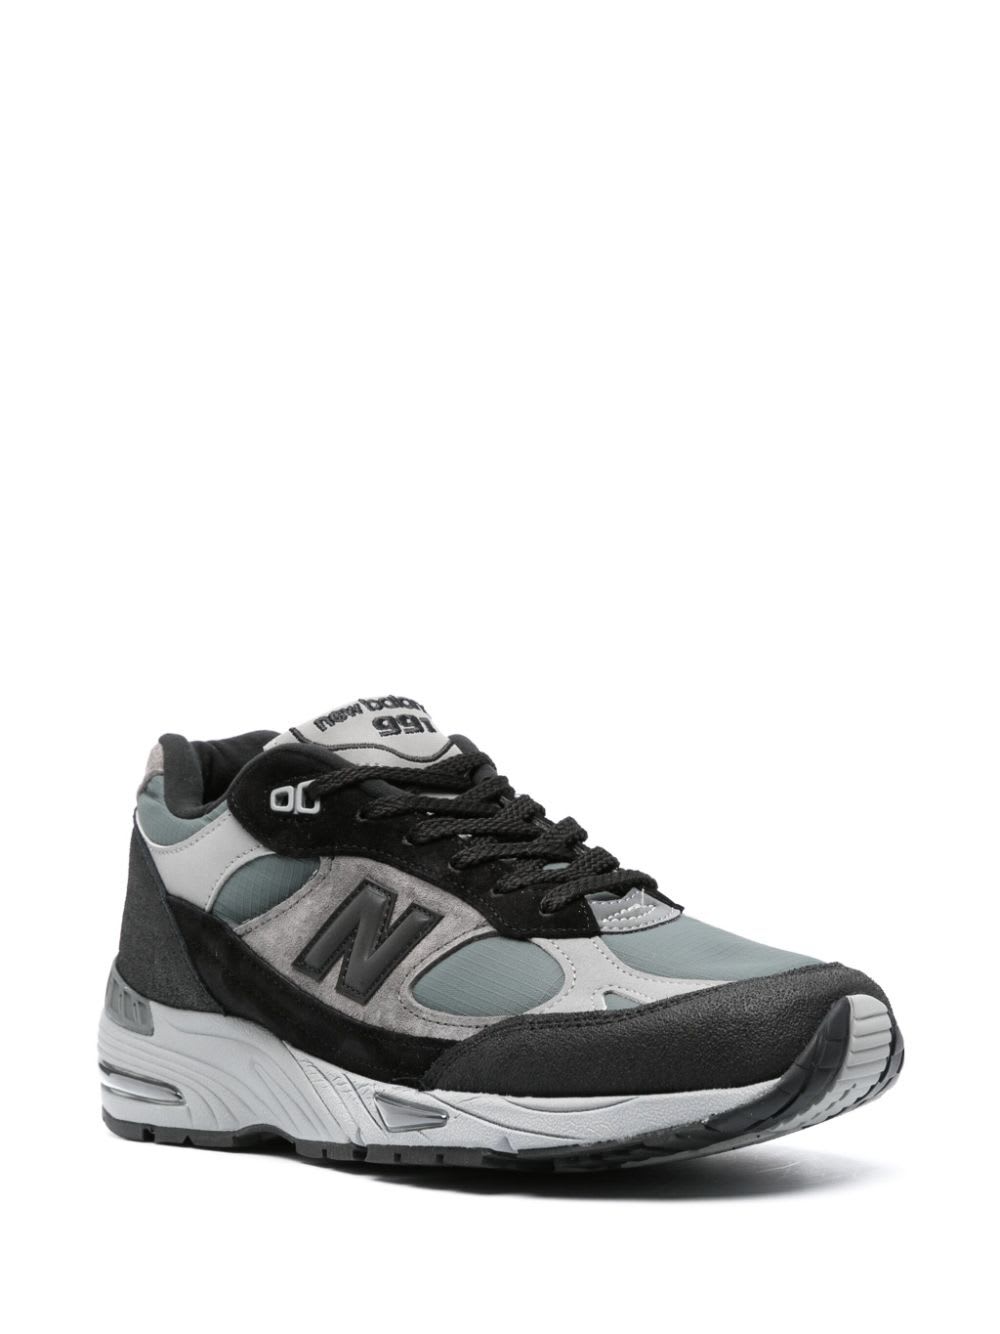 Shop New Balance 991 Lifestyle Sneakers In Black Grey